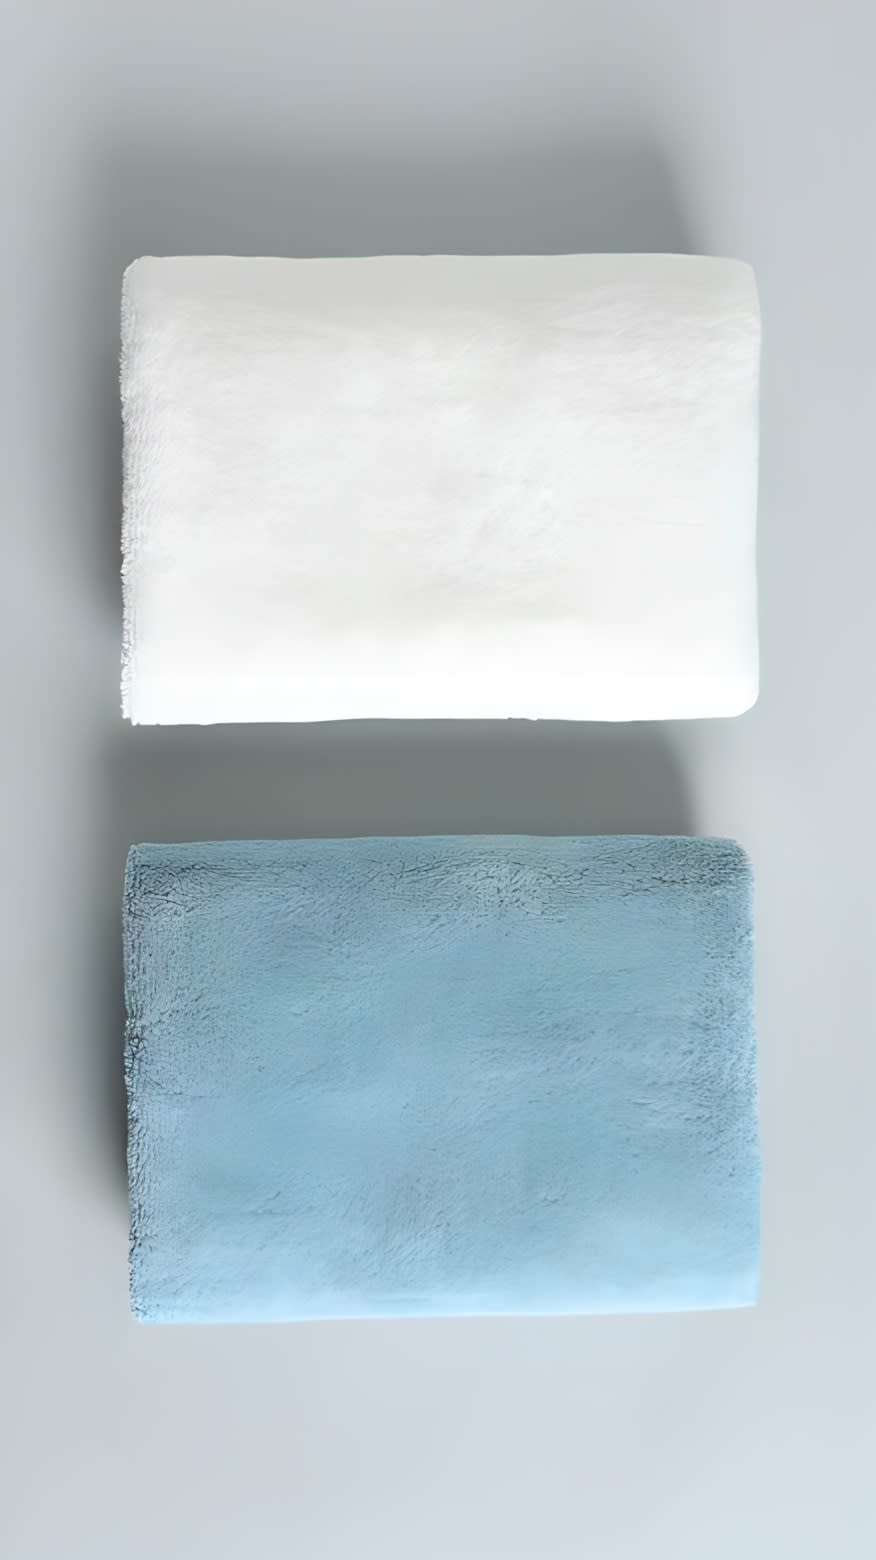 Folded hand towels against a gray background